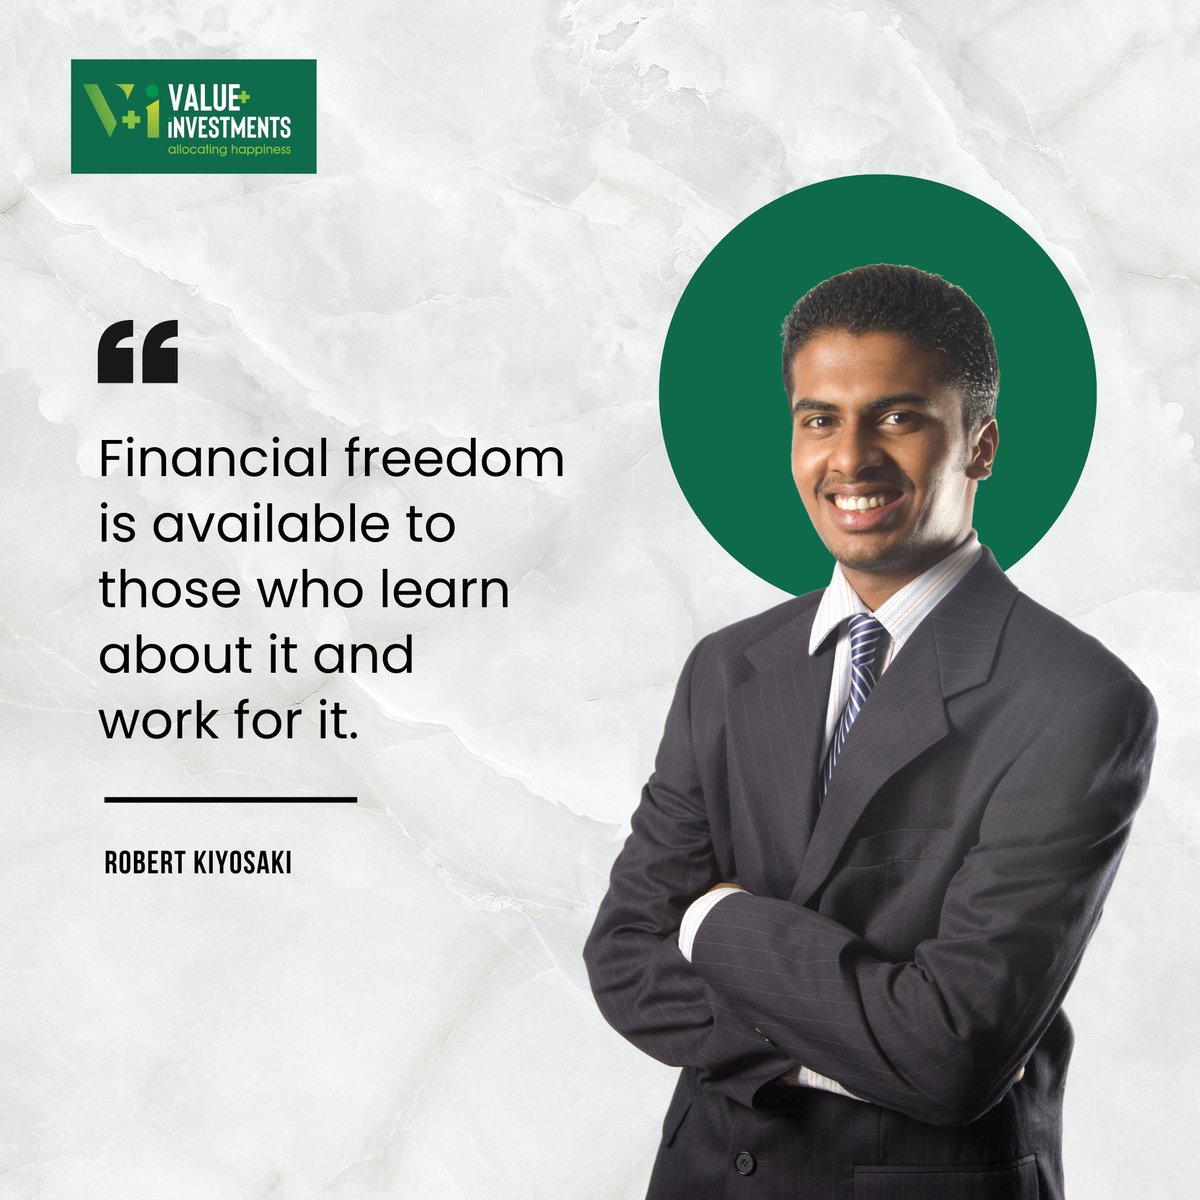 Unlocking the path to financial freedom, one step at a time 💰💪 Learn, work, achieve!

#ValuePlusInvestments
#FinancialFreedomJourney #LearnAndEarn #WorkForSuccess #WealthCreation #FinancialEmpowerment #MoneyMatters #InvestInYourFuture #FinancialWisdom #FinancialGoals #quotes